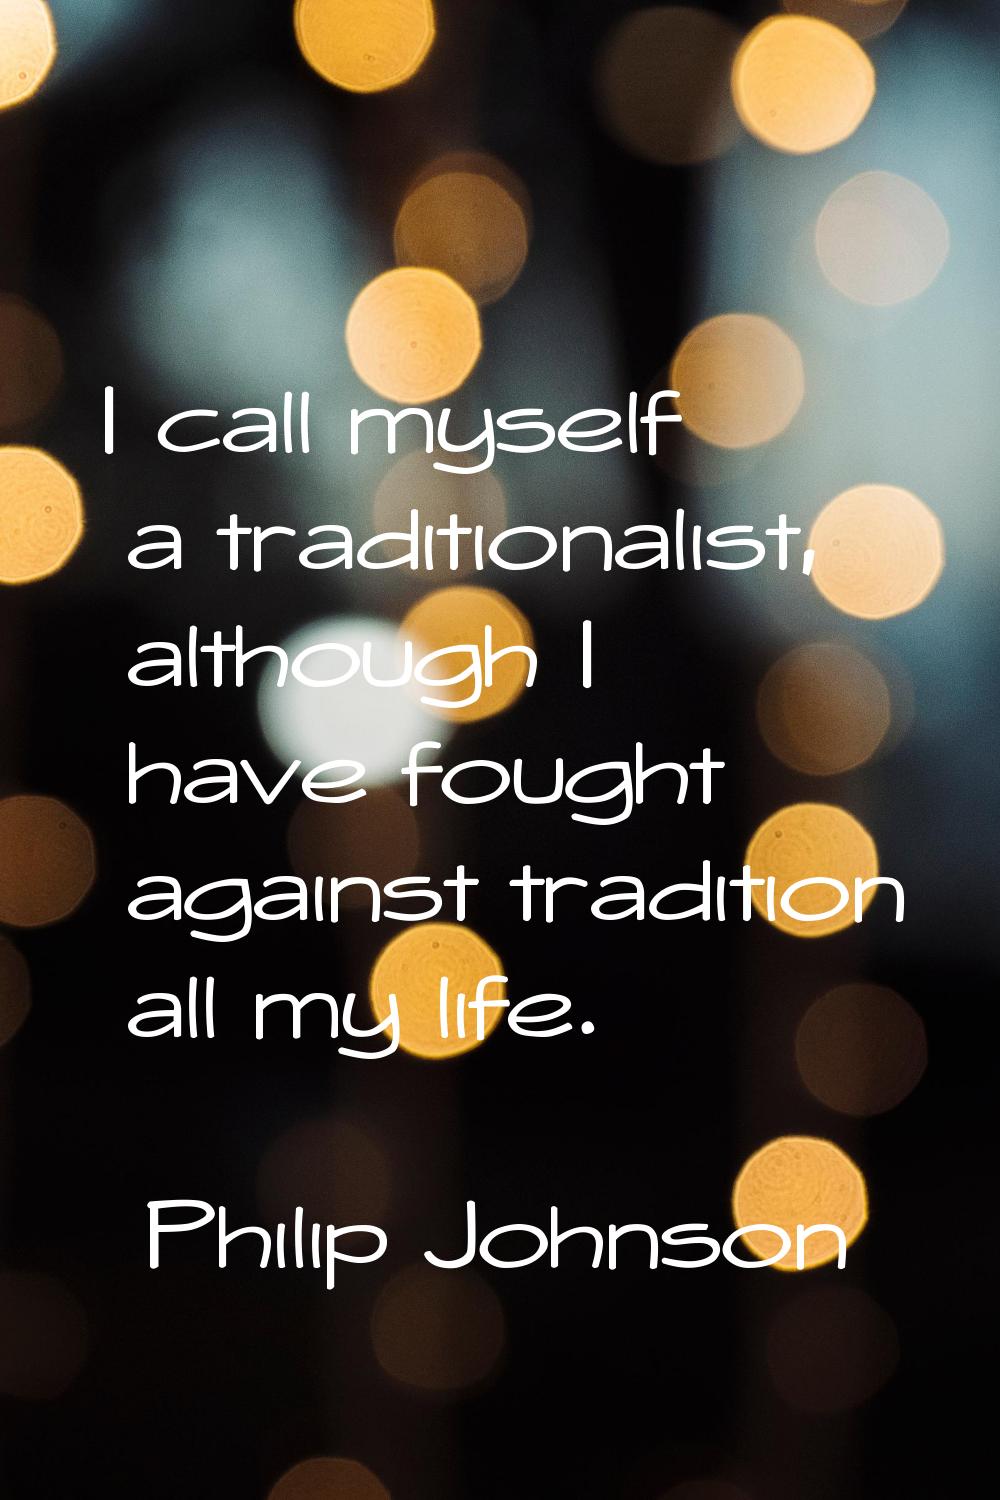 I call myself a traditionalist, although I have fought against tradition all my life.